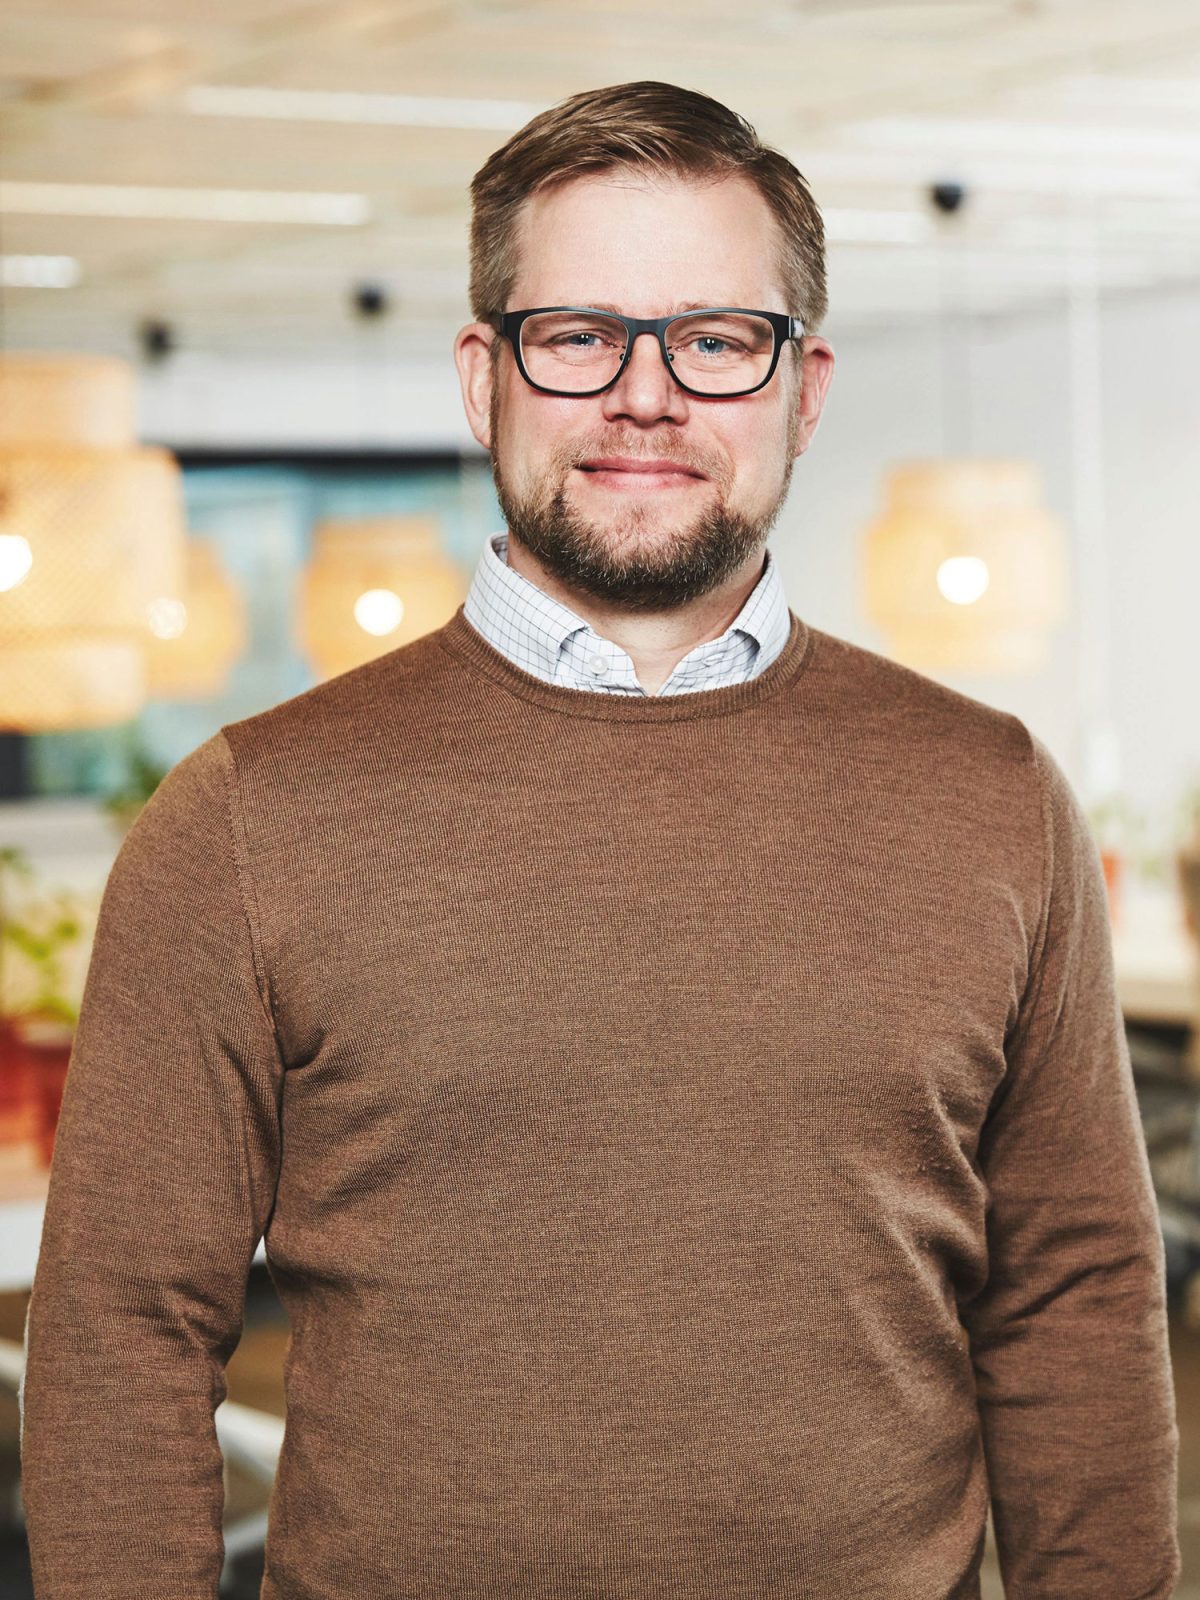 Man with short brown hair, glasses and brown sweater over buttton-down shirt, Nils Månsson.